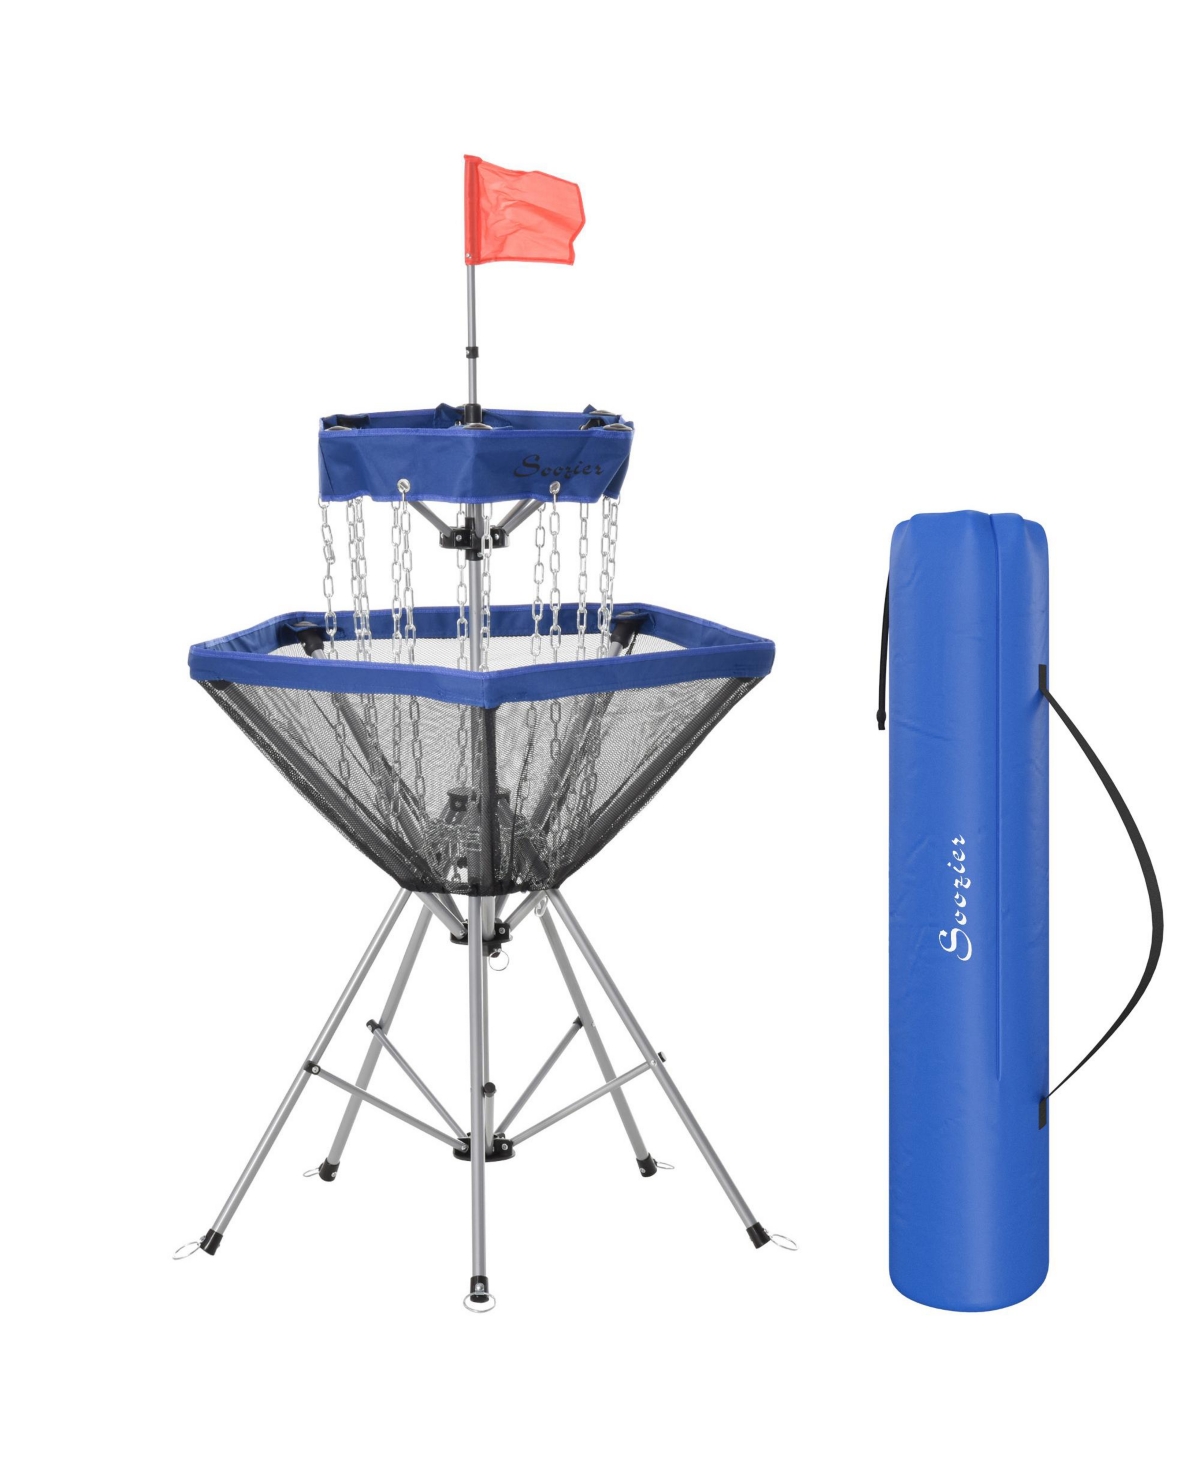 Portable Disc Golf Basket Target with 12-Chain, Easy Carry Bag, Dark Blue - Sky blue